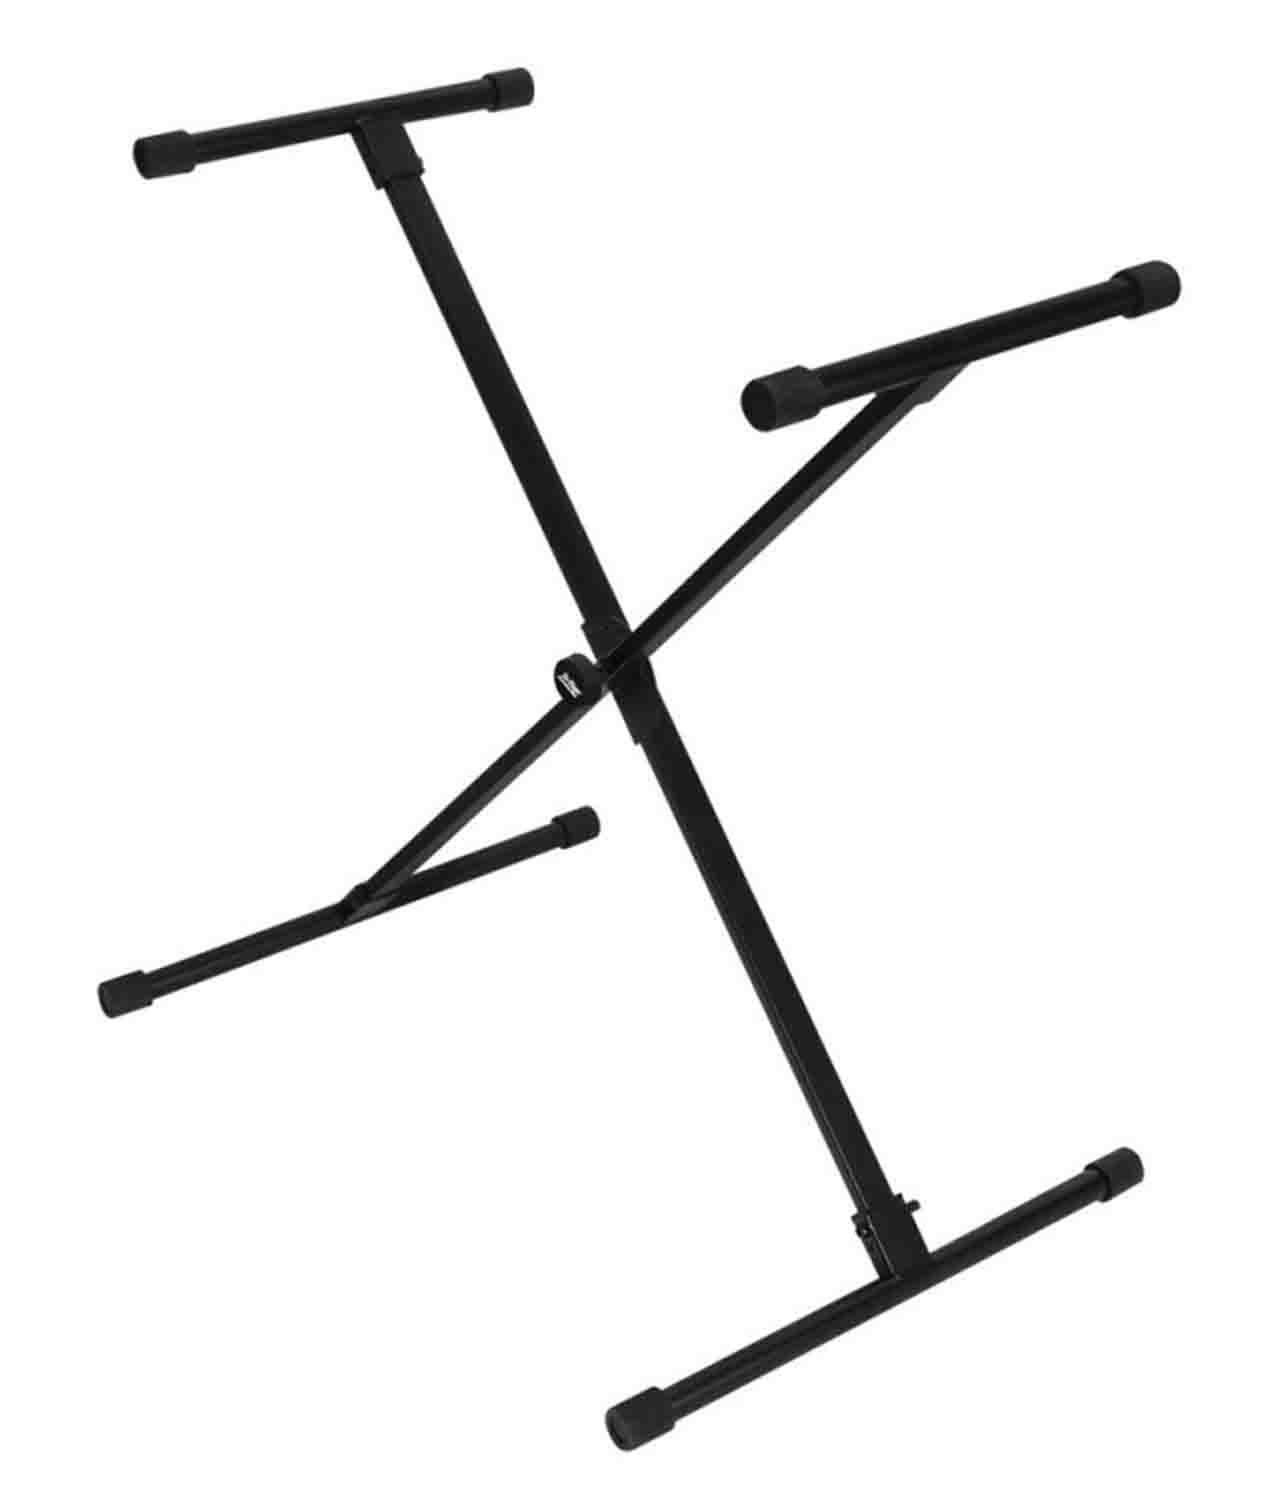 Onstage KS8190X Single-X Bullet Nose Keyboard Stand with Lok-Tight Construction - Hollywood DJ